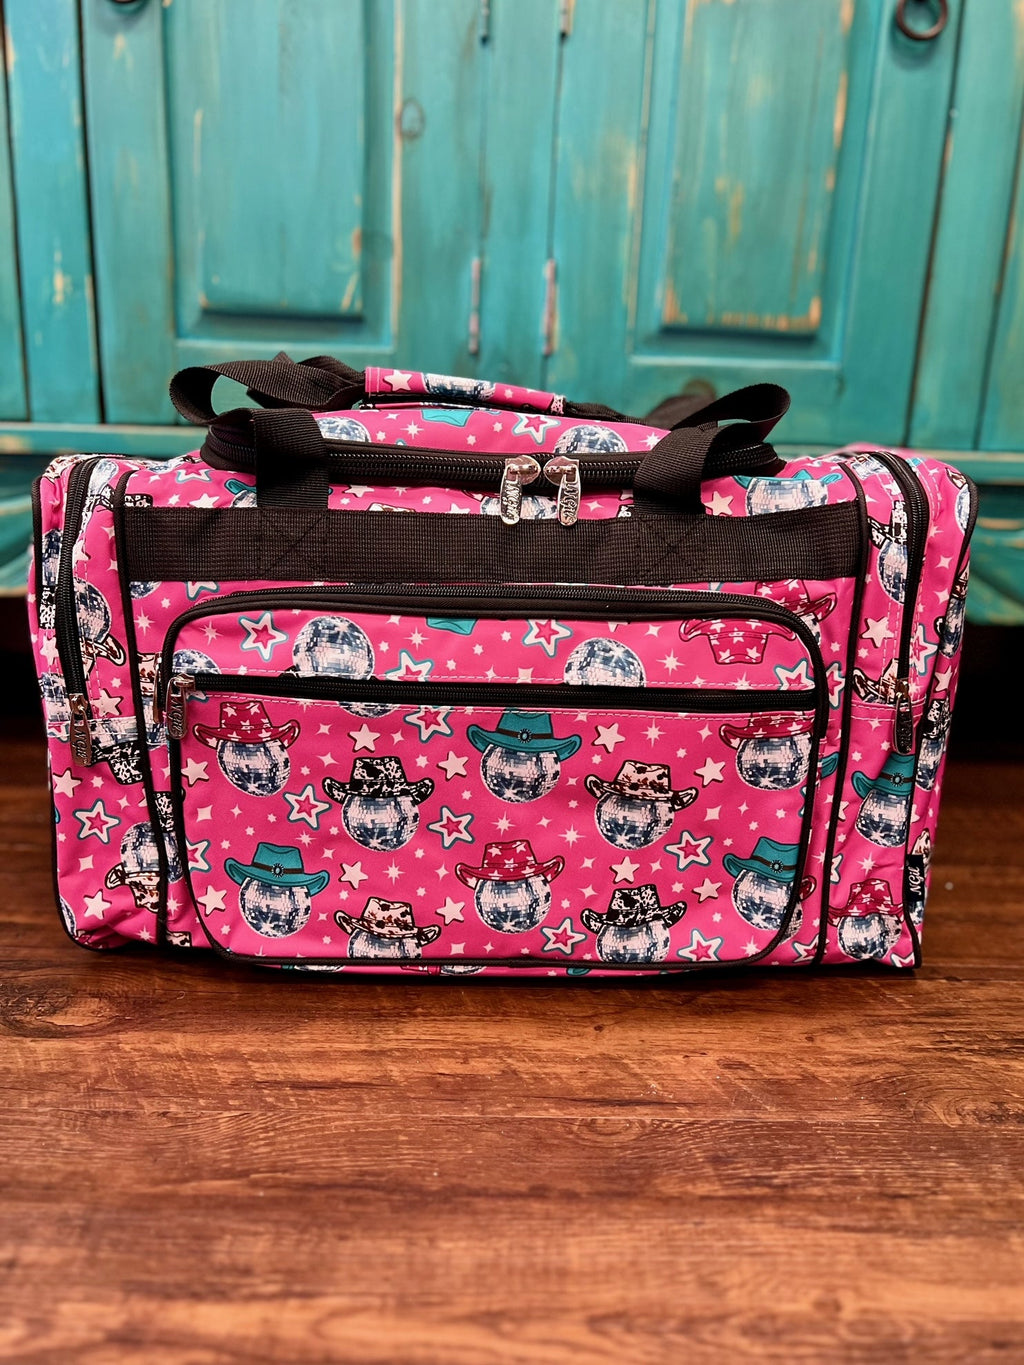 The Disco Cowgirl Small Duffle Bag